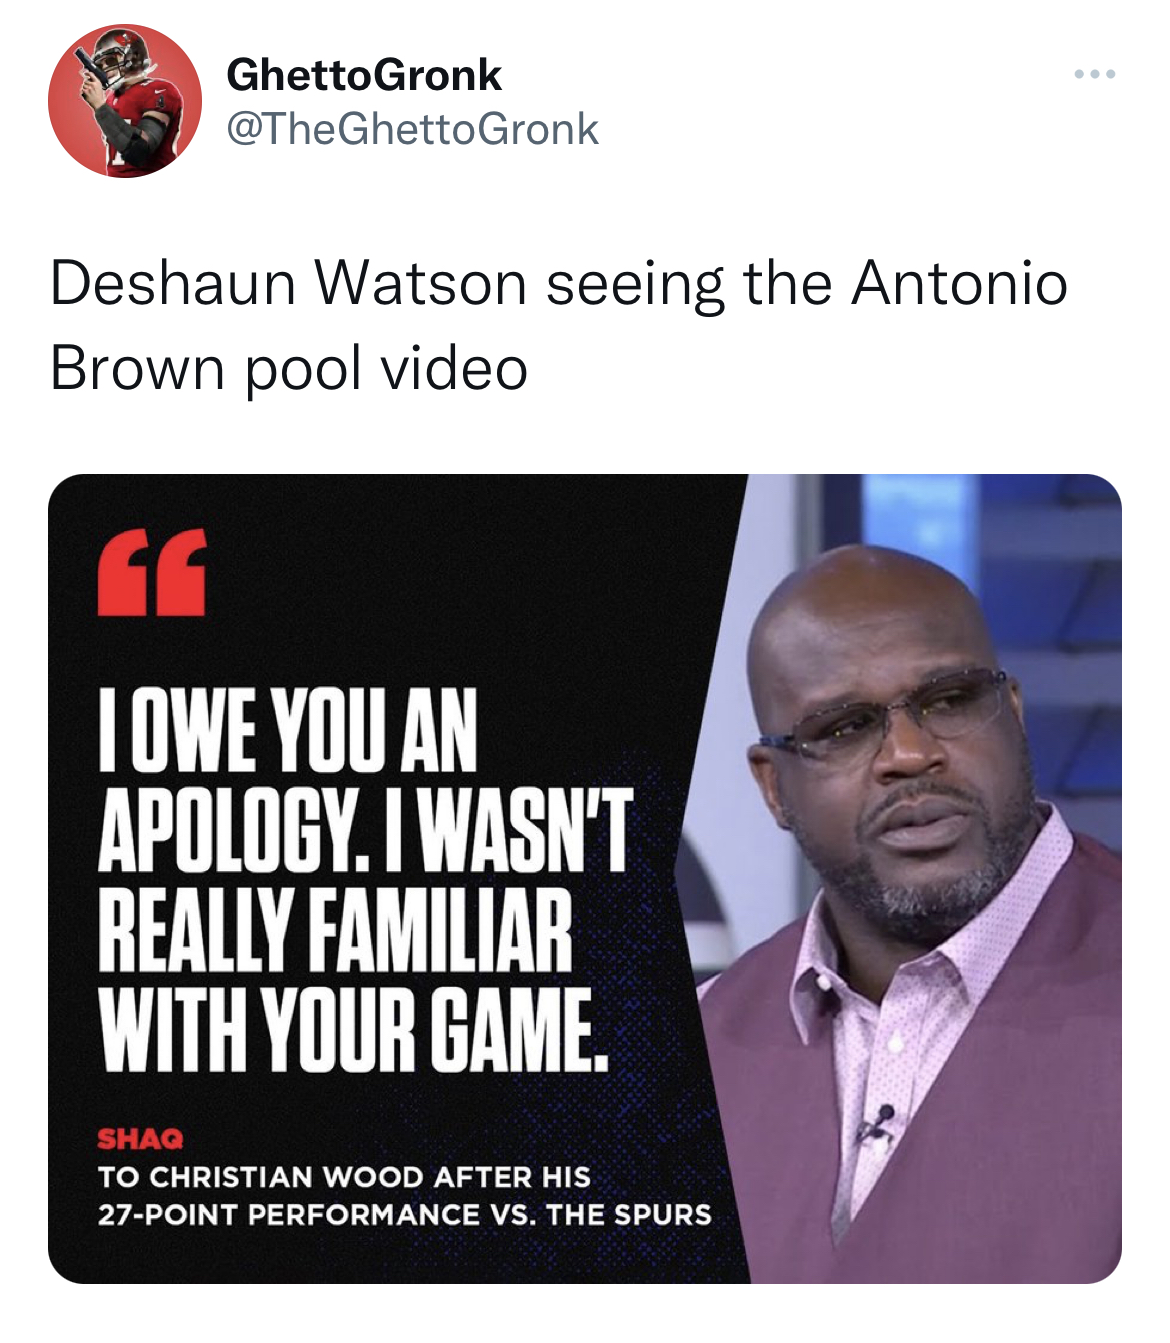 nfl memes - media - Ghetto Gronk Deshaun Watson seeing the Antonio Brown pool video 66 I Owe You An Apology. I Wasn'T Really Familiar With Your Game. Shaq To Christian Wood After His 27Point Performance Vs. The Spurs